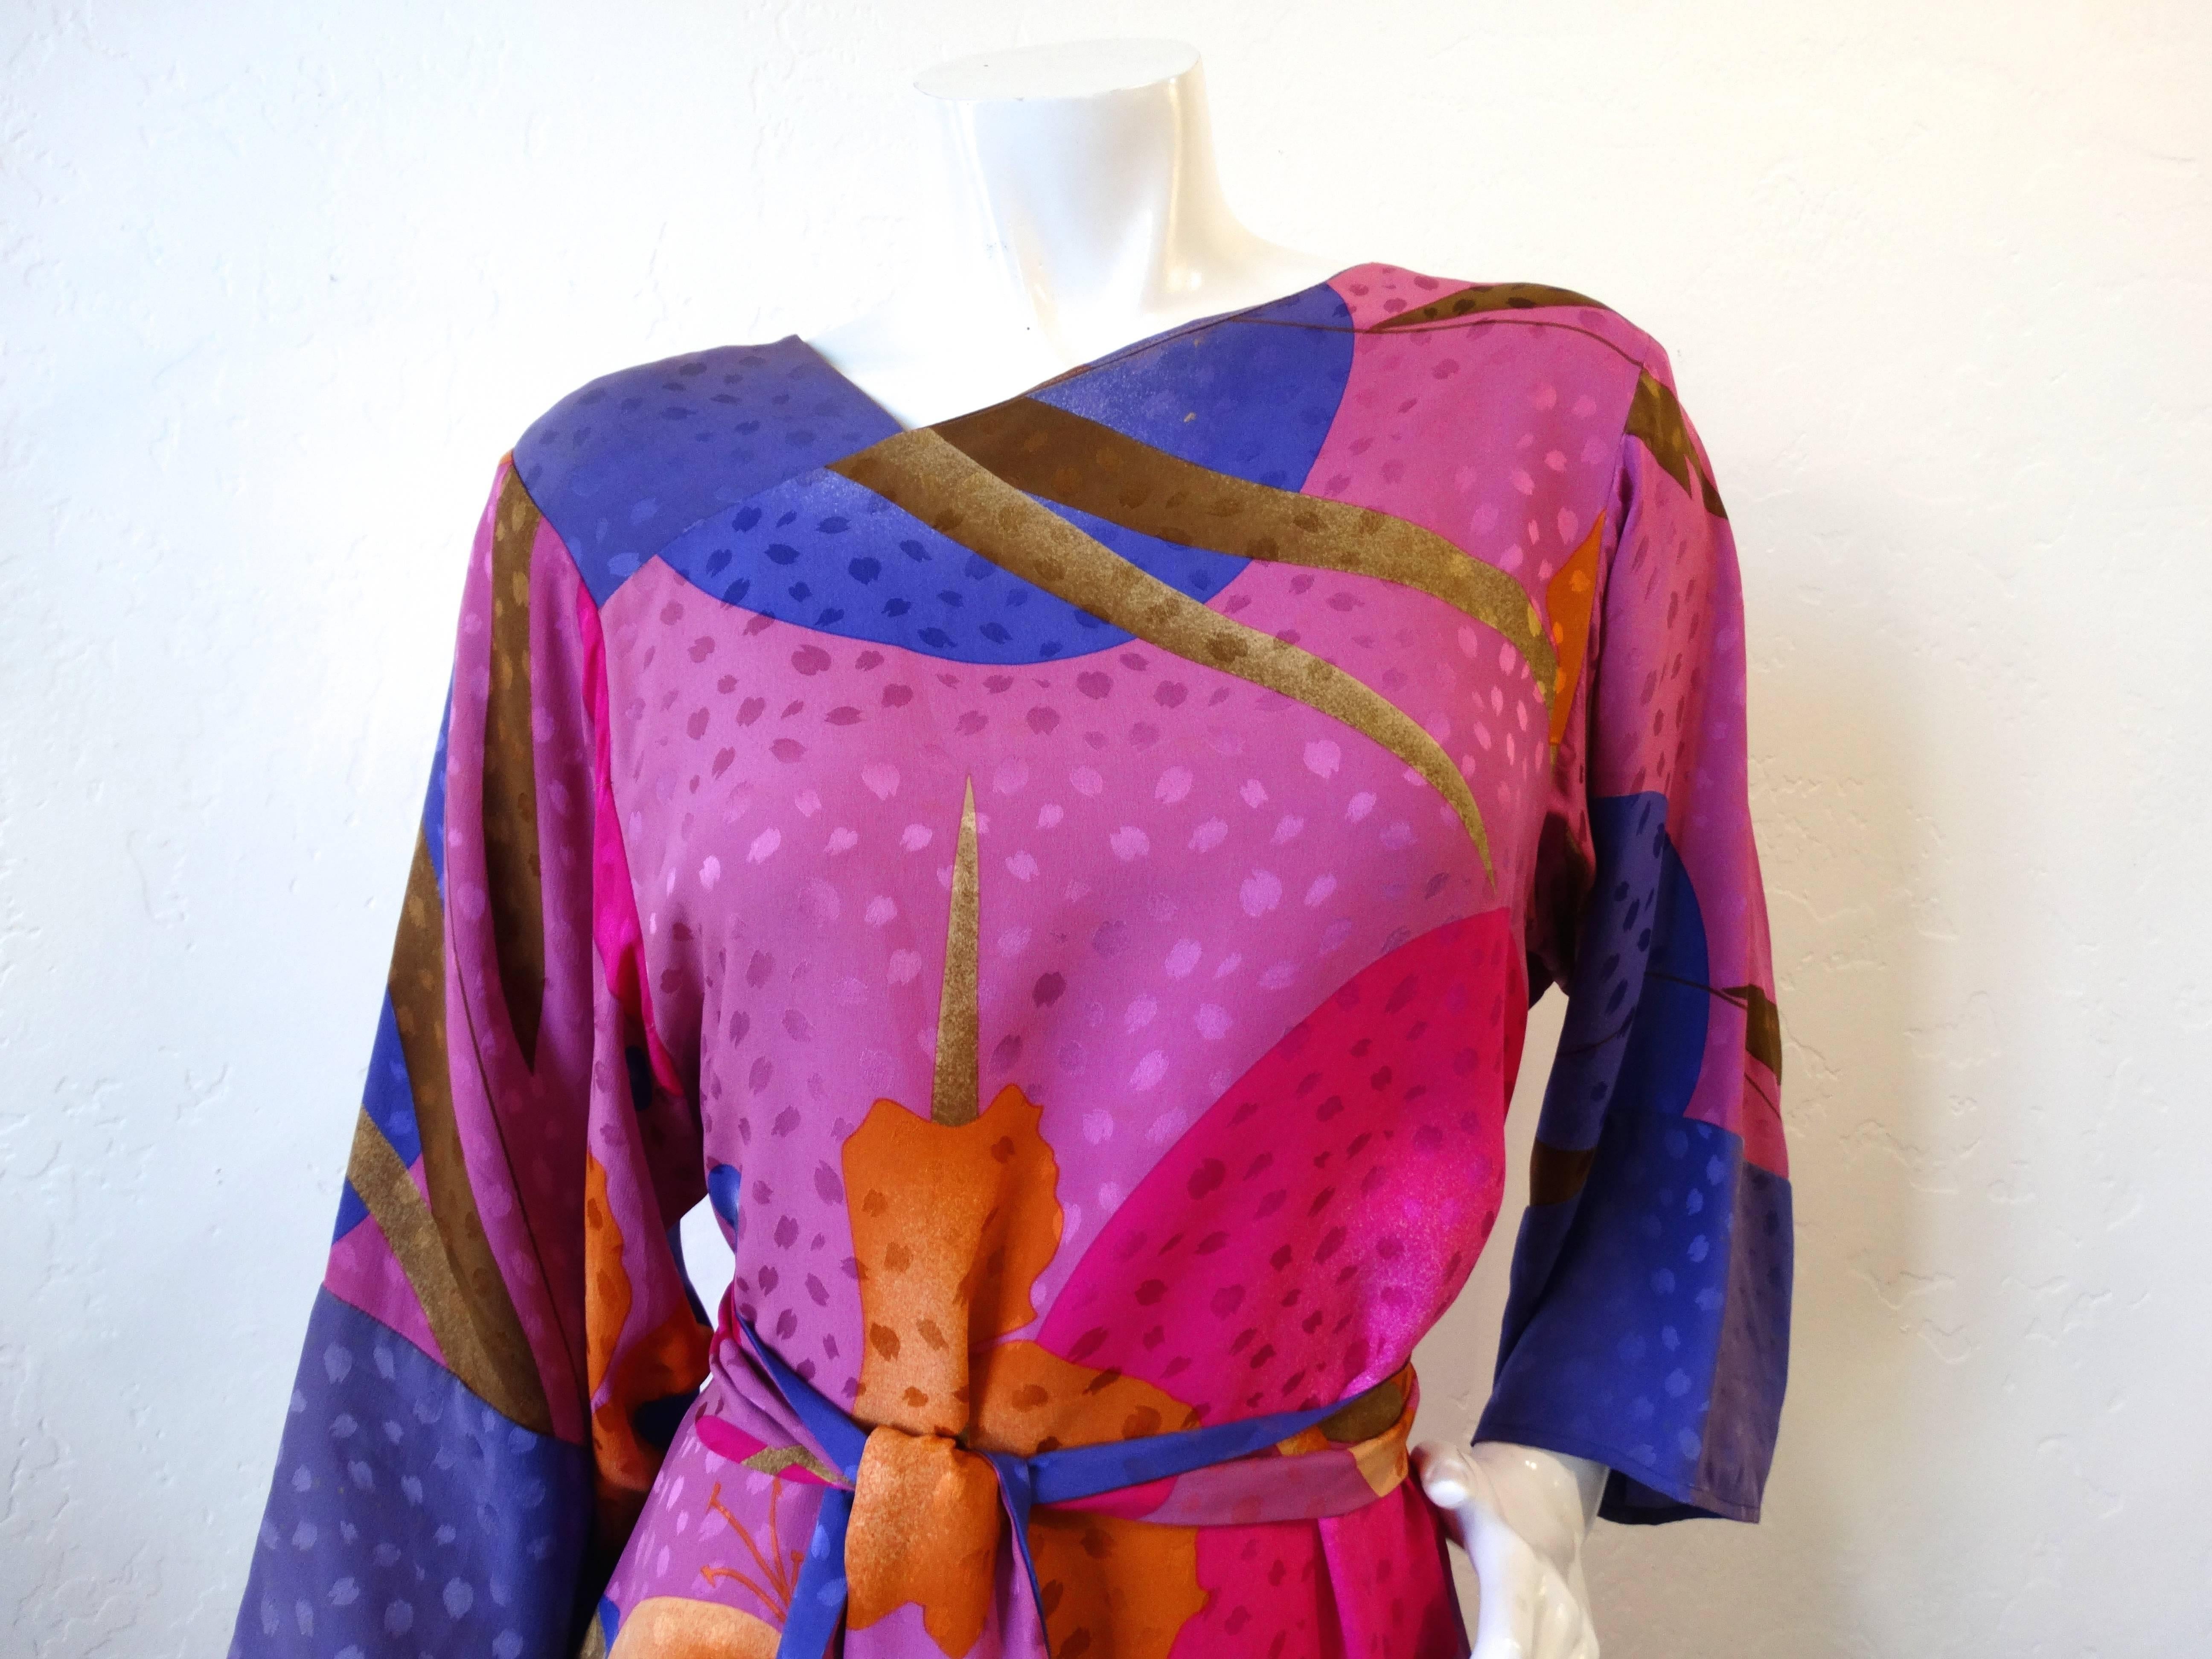 The sweetest little Flora Kung dress circa 1980s! Made of a breezy, soft silk fabric printed with an abstract lily inspired pattern in shades of magenta, violet and orange. Unique asymmetrical neckline slopes toward the right shoulder. Cinches in at